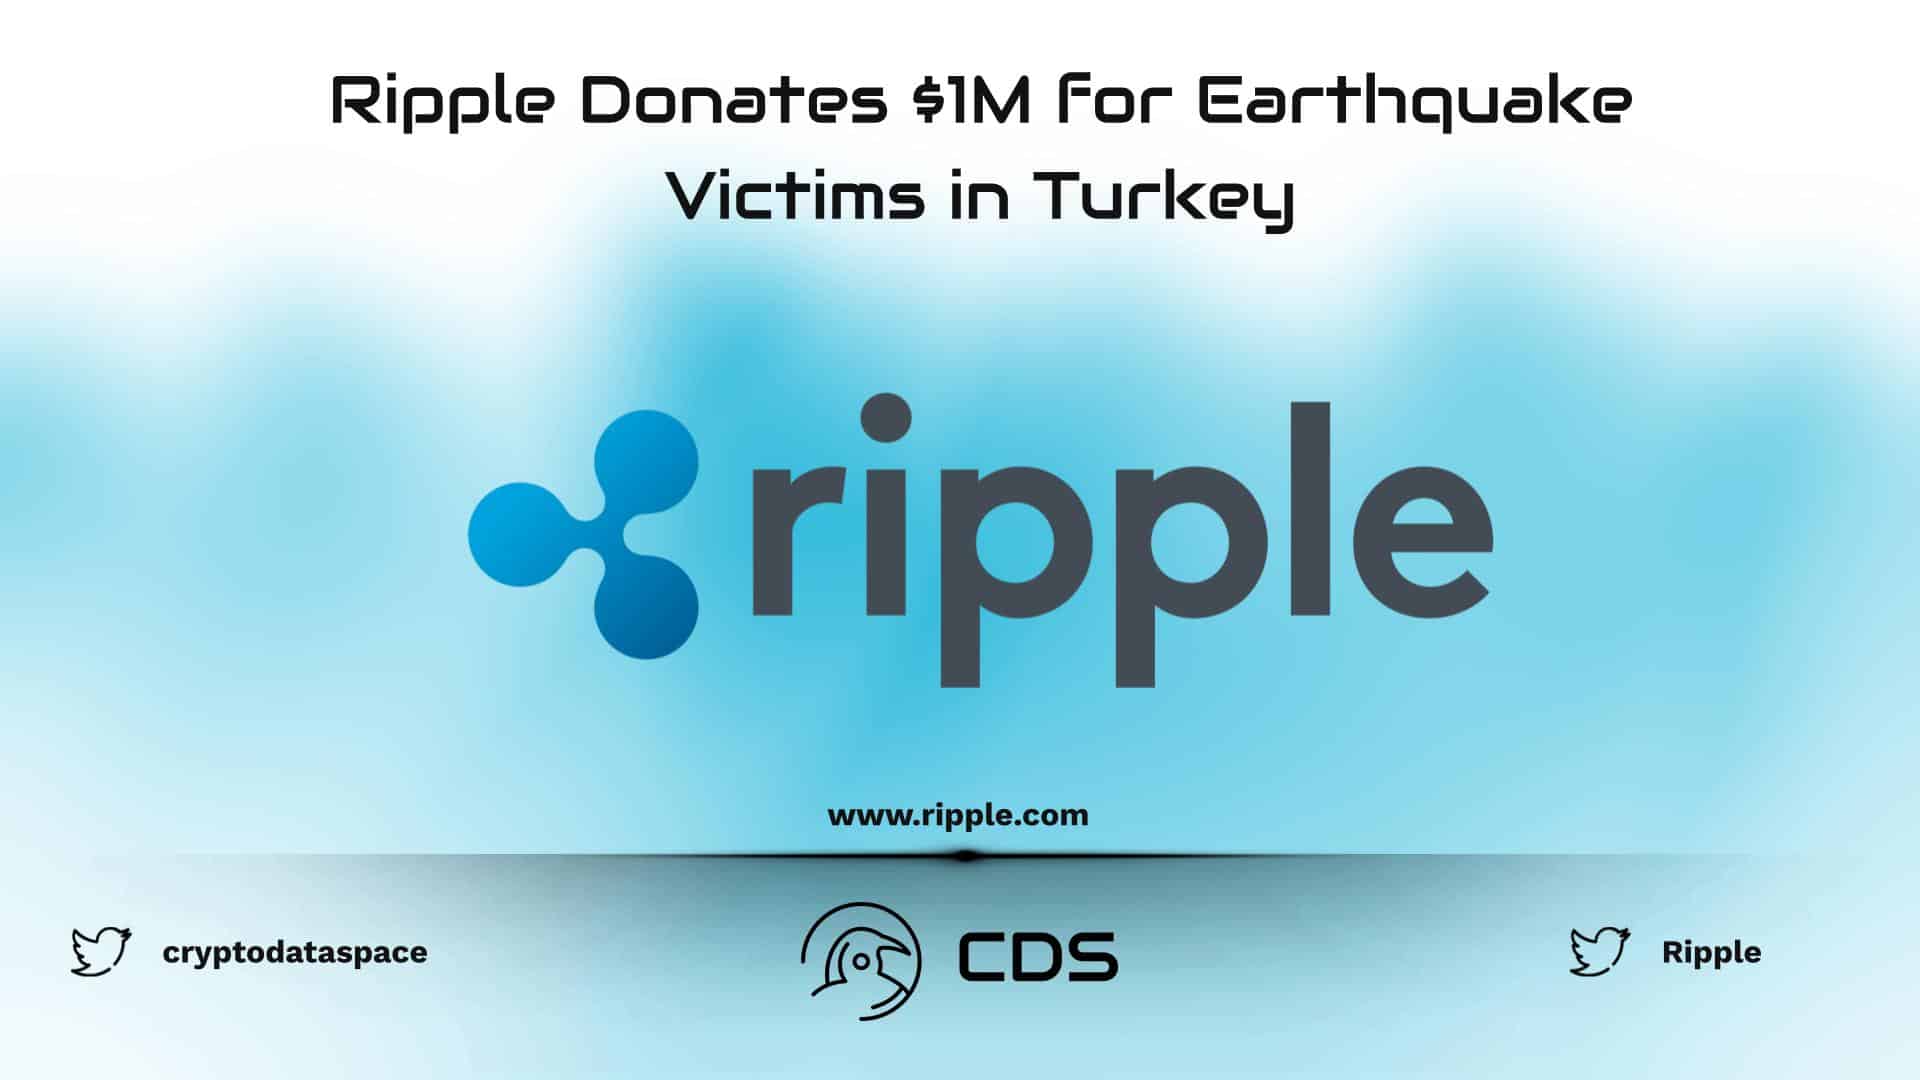 Ripple Donates $1M for Earthquake Victims in Turkey